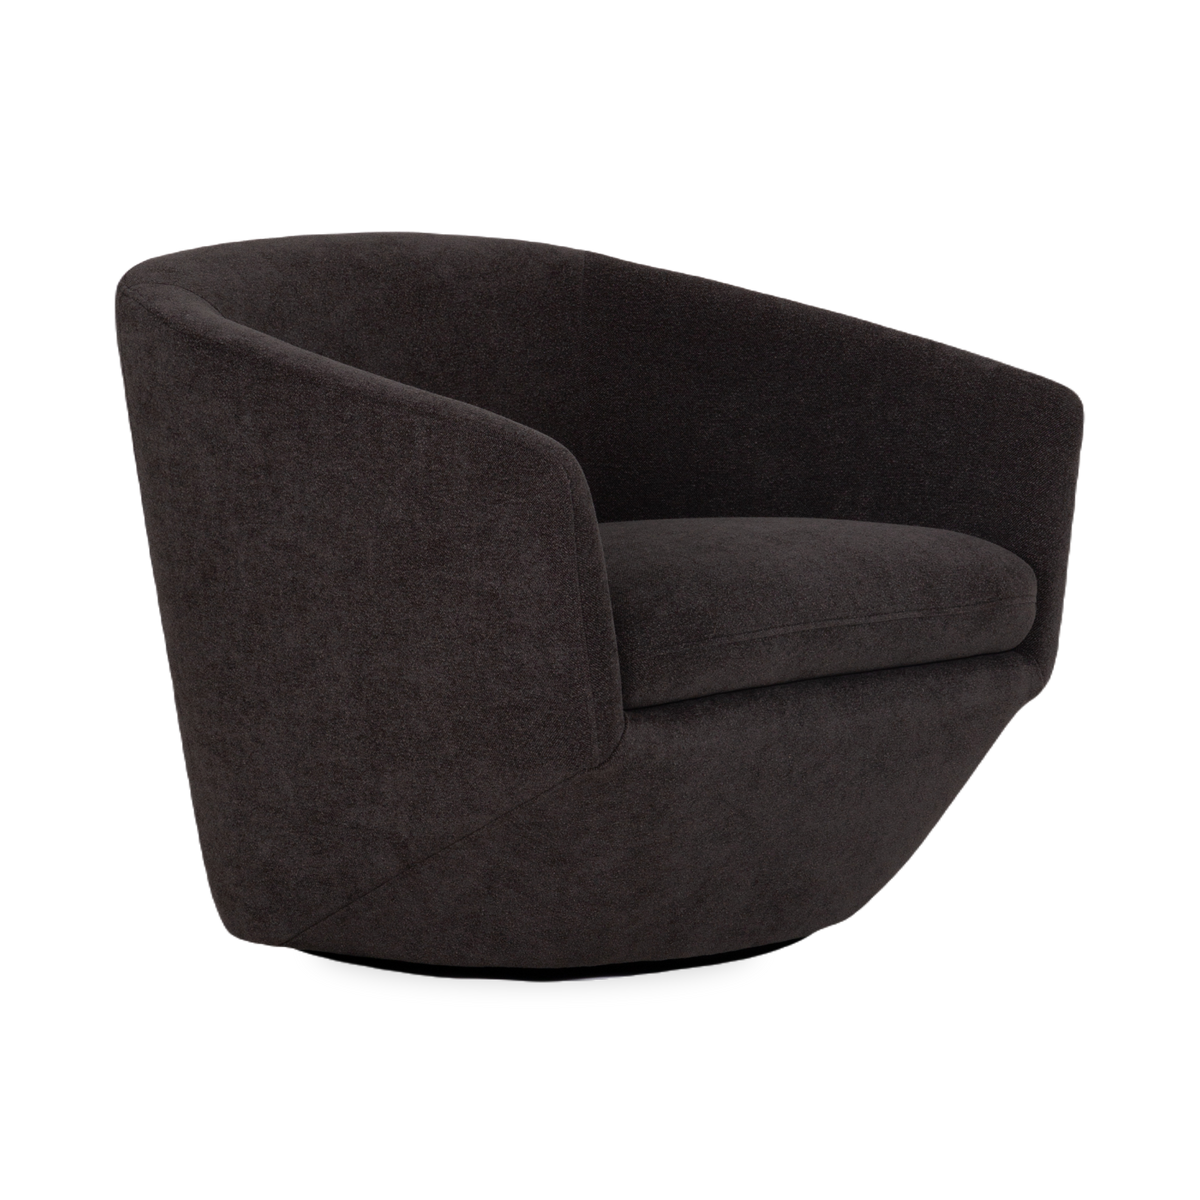 Mixing sharp angles with soft curves, the Melbourne Swivel Chair is a sculptural twist on a classic look.